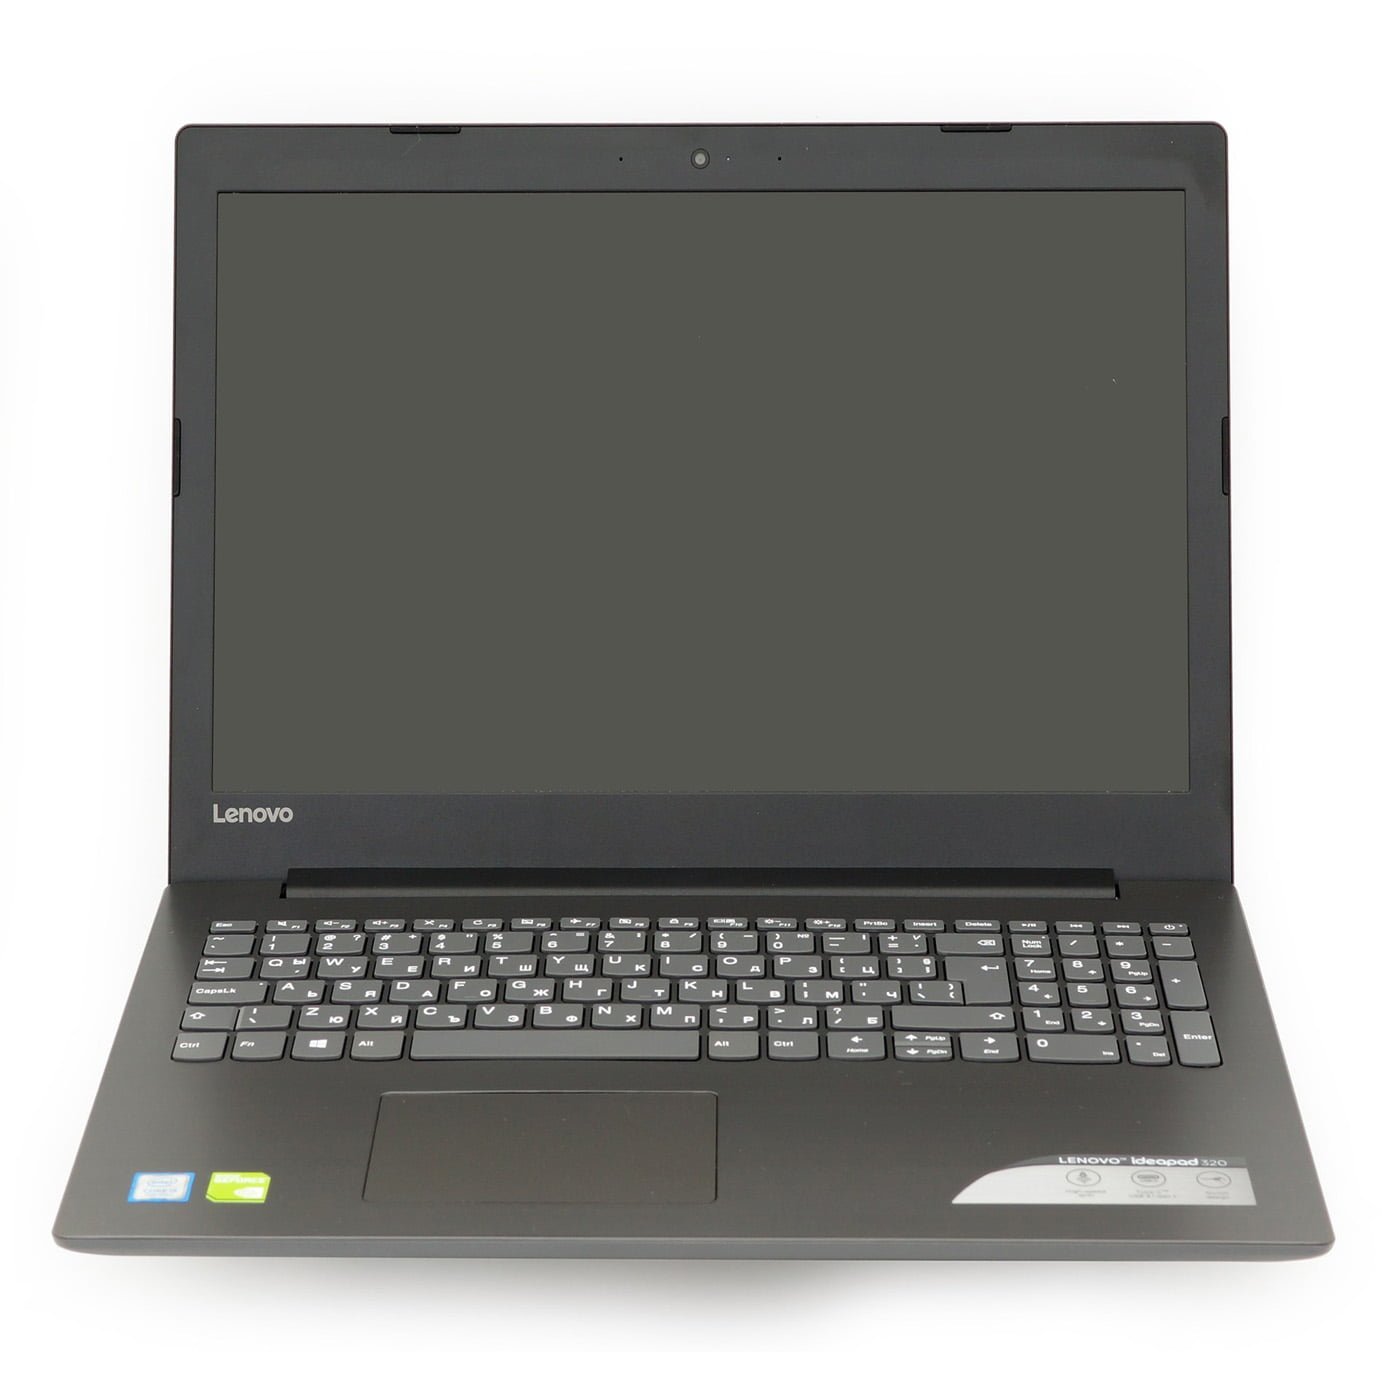 LENOVO LAPTOPS WITH DEDICATED GRAPHICS CARD